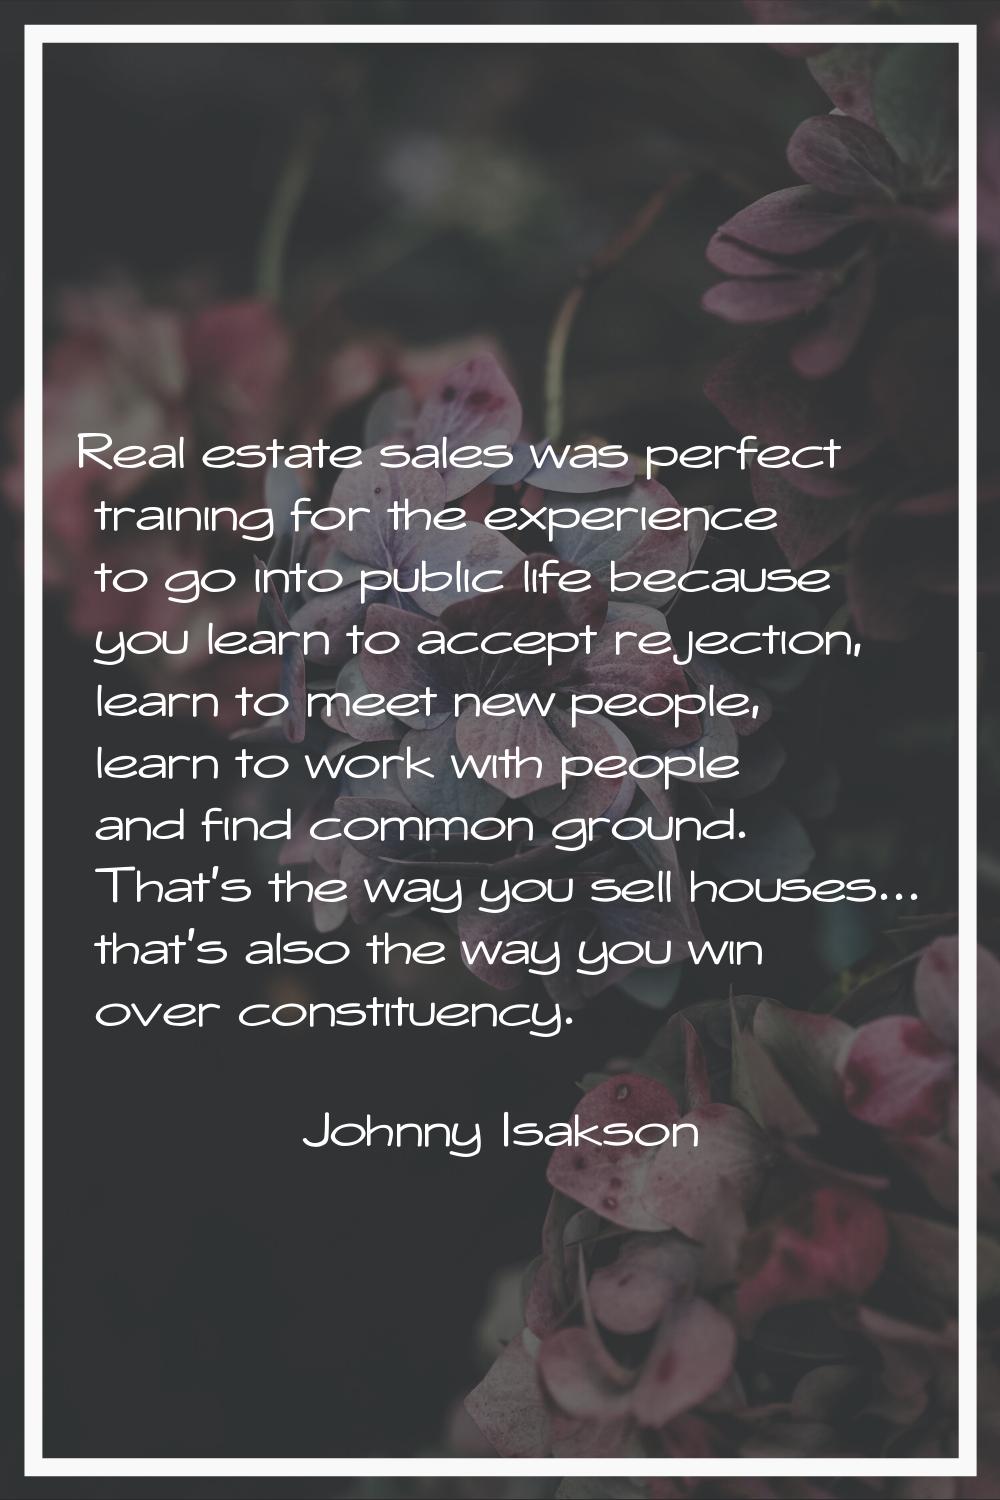 Real estate sales was perfect training for the experience to go into public life because you learn 